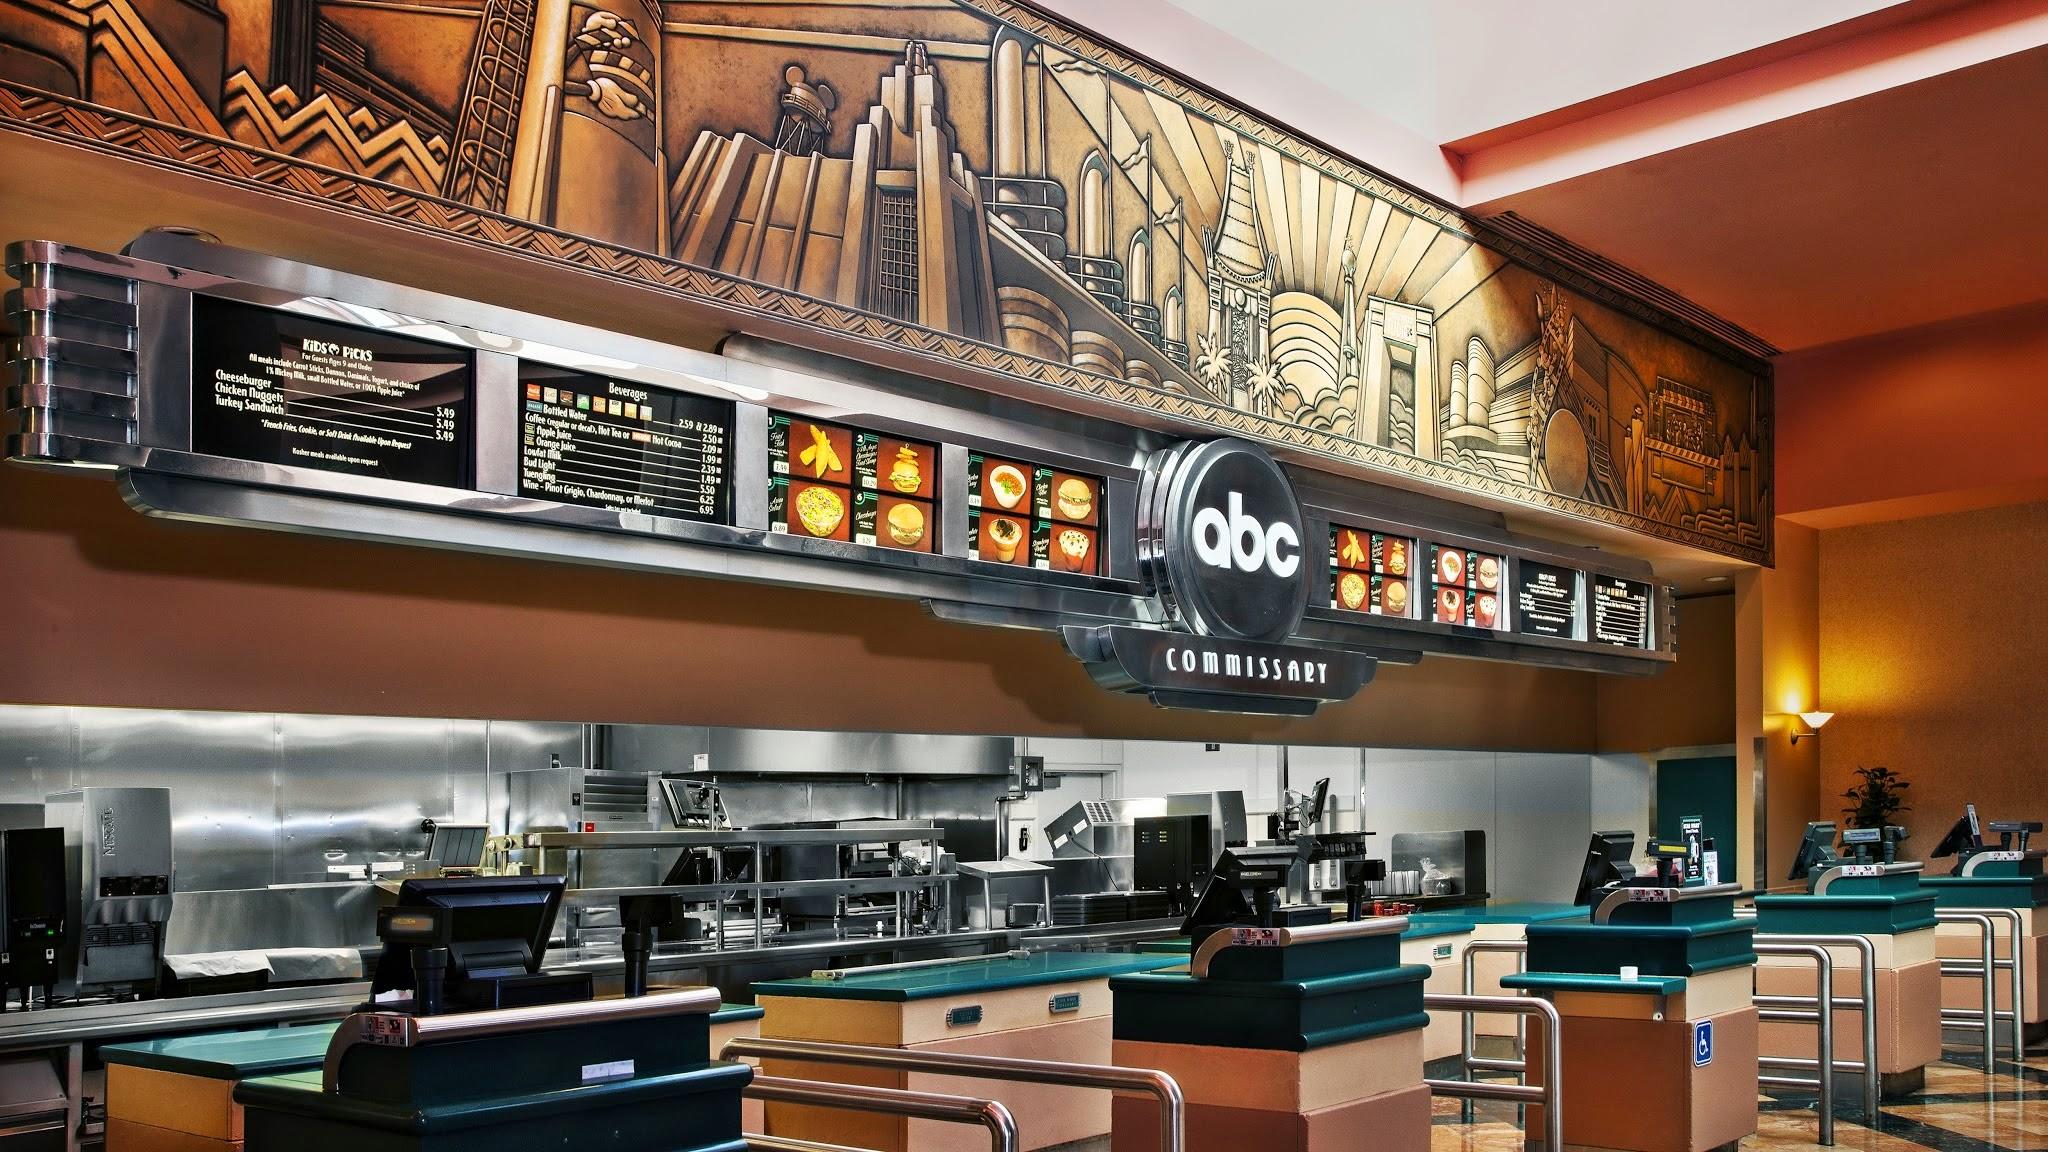 ABC Commissary - Temporarily Unavailable Photo